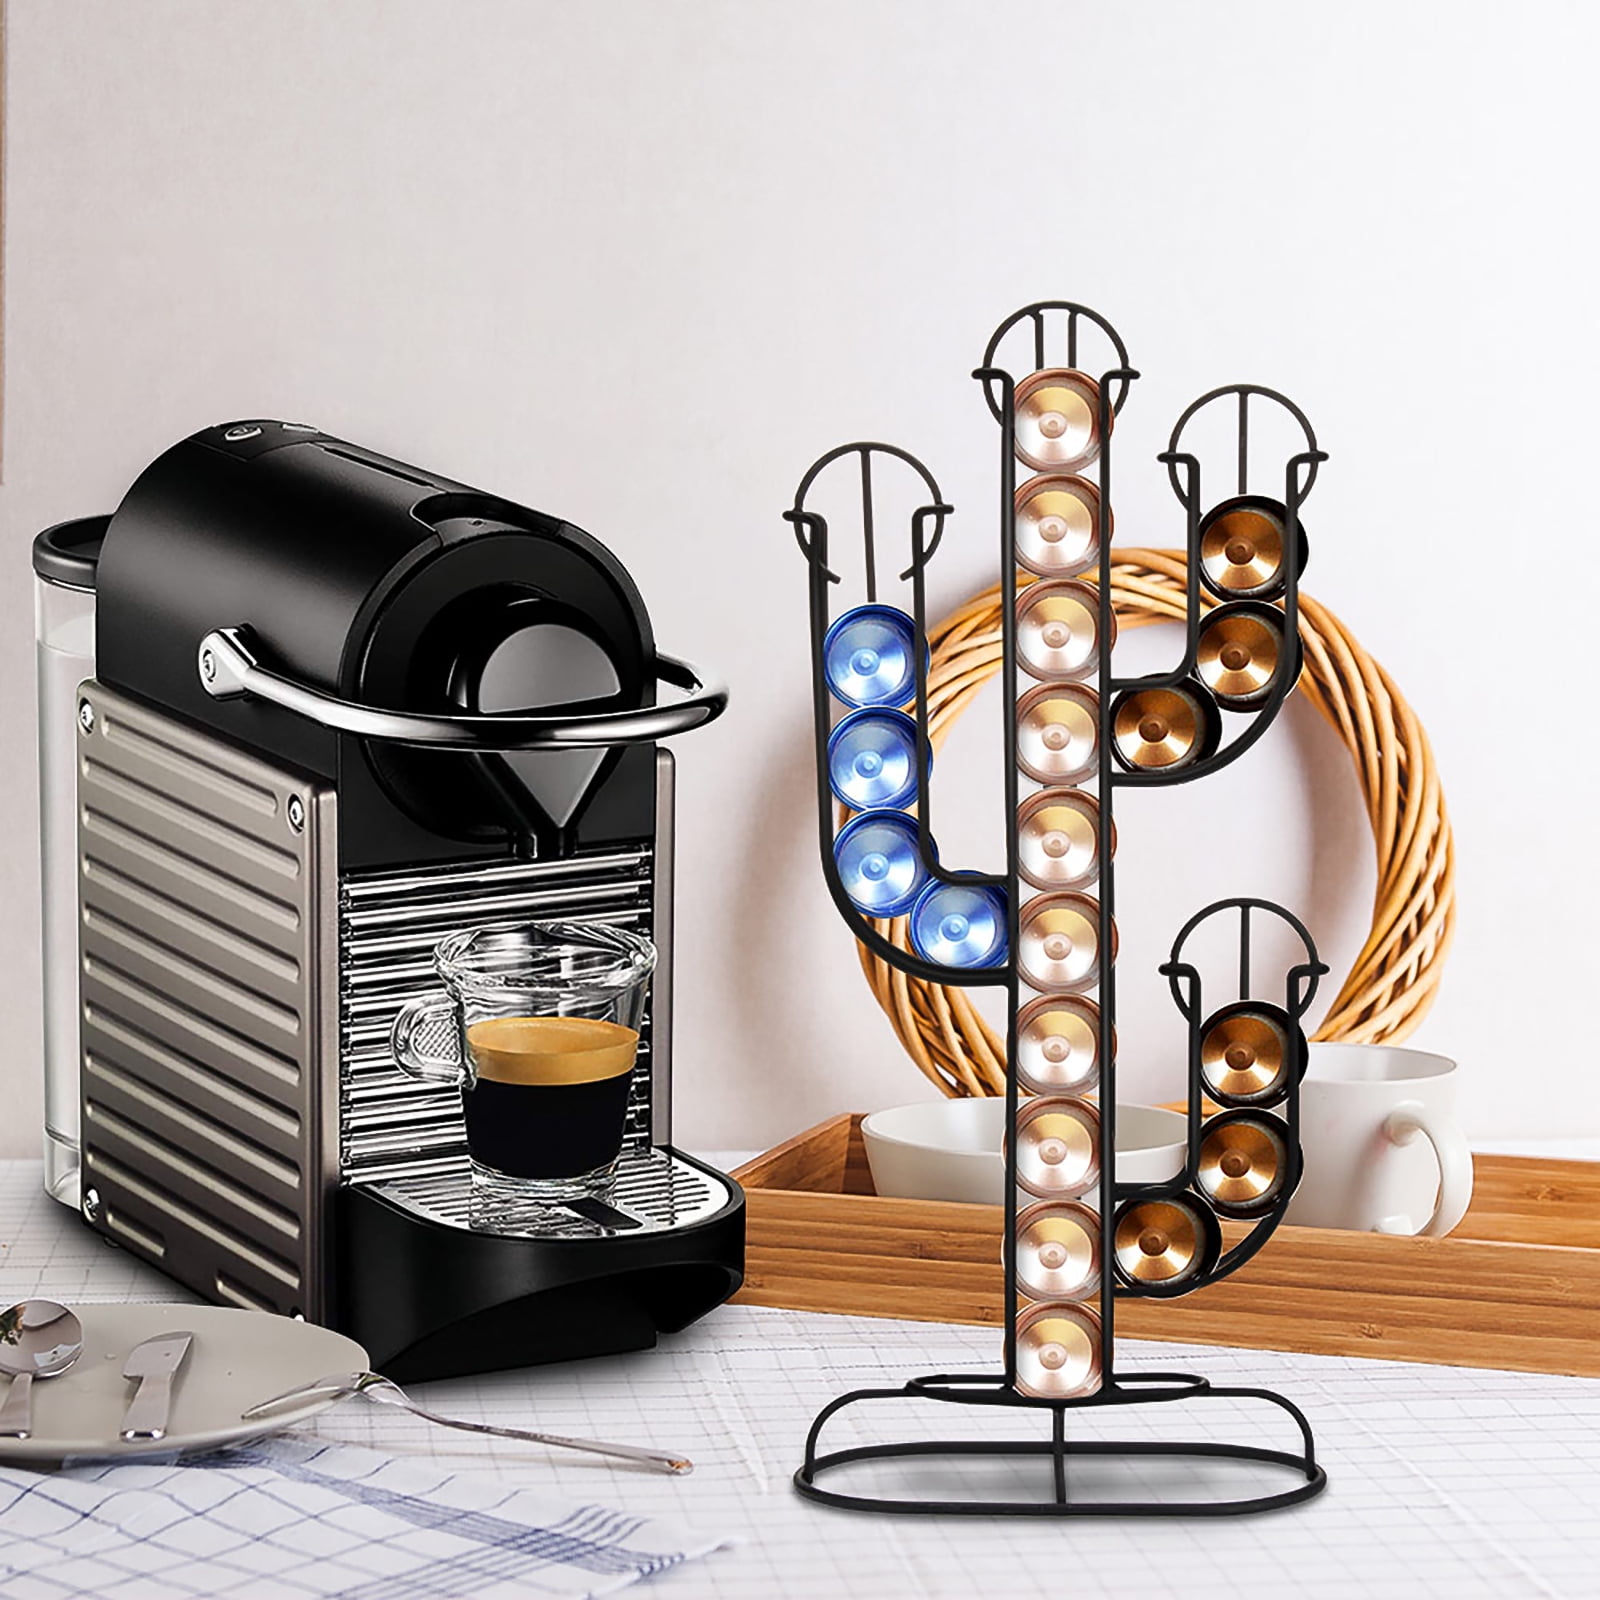 TureClos Nespresso Capsule Holder Stainless Steel Coffee Pod Holder Cactus  Dispenser Coffee Dispensing Tower Stand Fits 